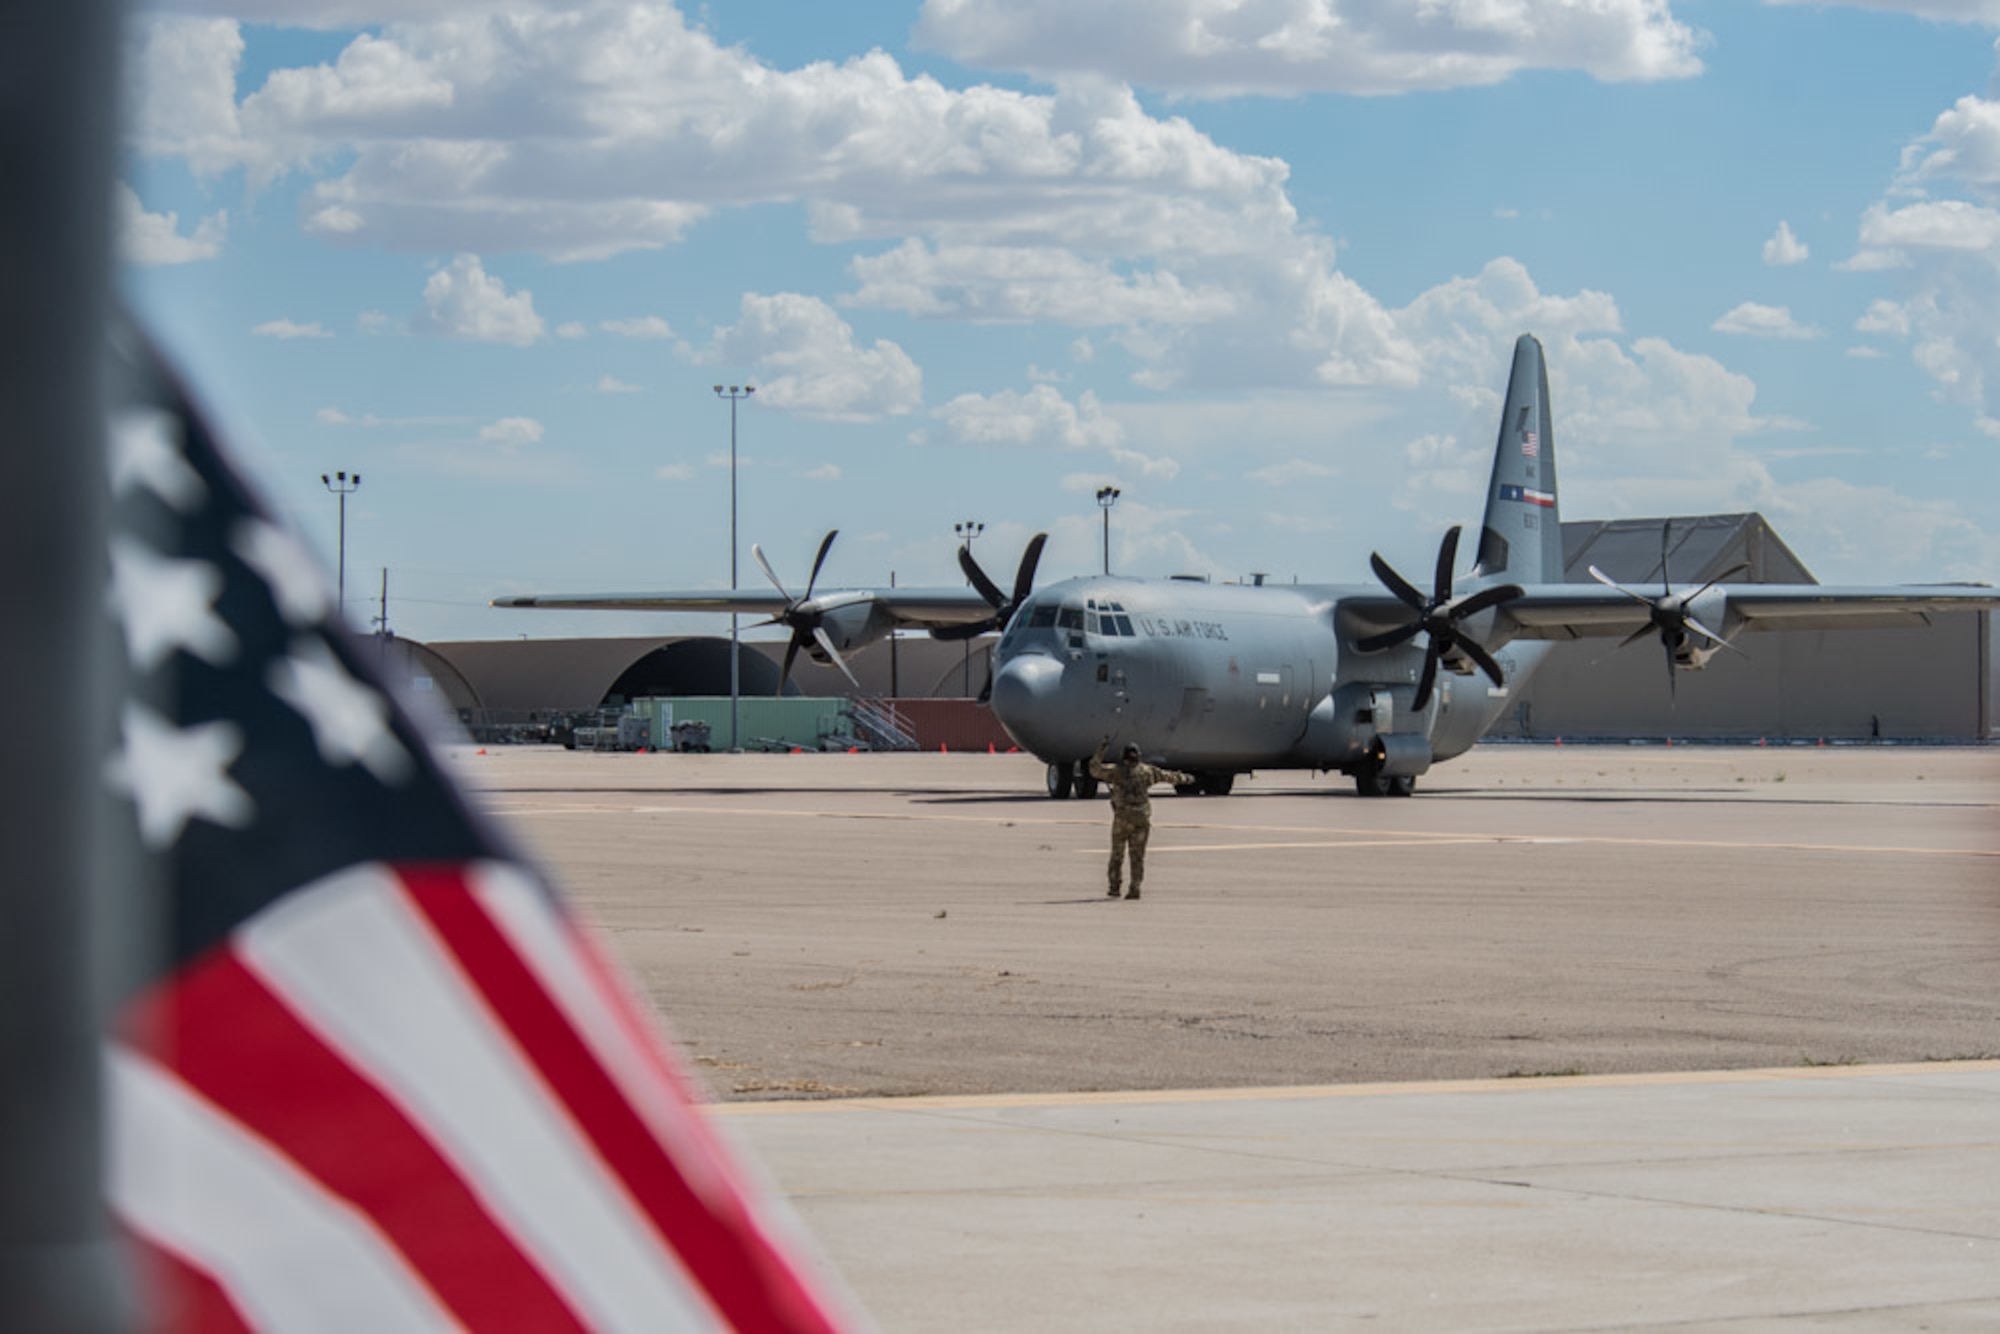 A C-130J Super Hercules carrying Afghan personnel taxis on the ramp at Holloman Air Force Base, New Mexico, Aug. 31, 2021. The Department of Defense, through U.S. Northern Command, and in support of the Department of Homeland Security, is providing transportation, temporary housing, medical screening, and general support for up to 50,000 Afghan evacuees at suitable facilities, in permanent or temporary structures, as quickly as possible. This initiative provides Afghan personnel essential support at secure locations outside Afghanistan. (U.S. Air Force photo by Staff Sgt. Kenneth Boyton)